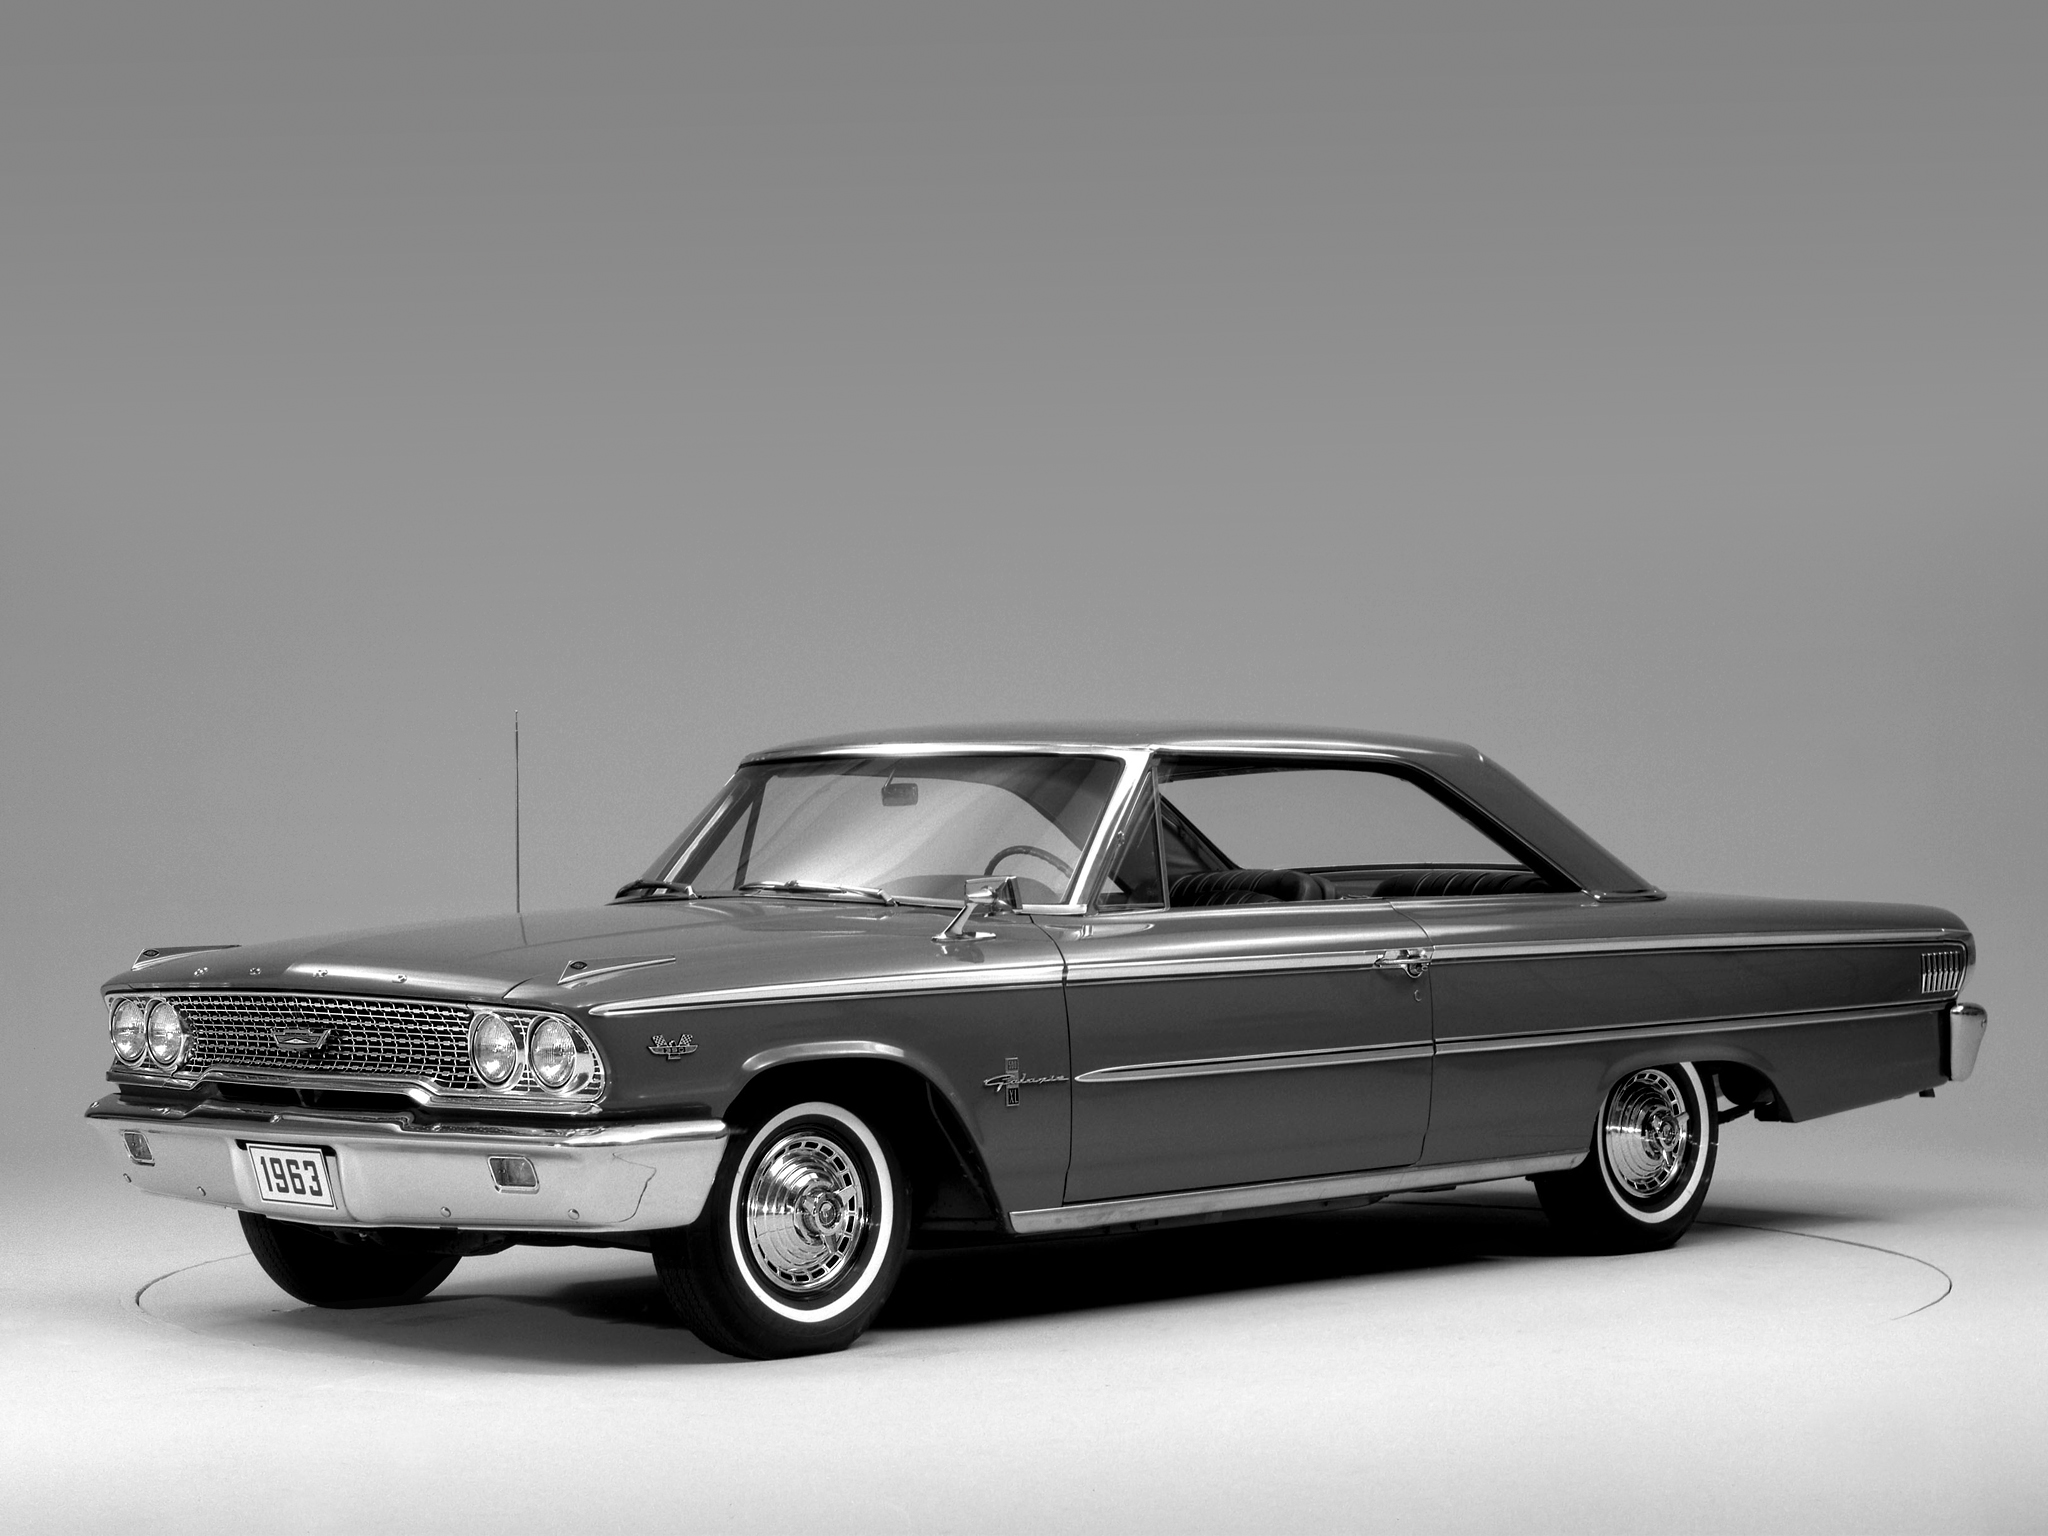 Free download 1963 Ford Galaxie 500 X L Hardtop Coupe classic wallpaper